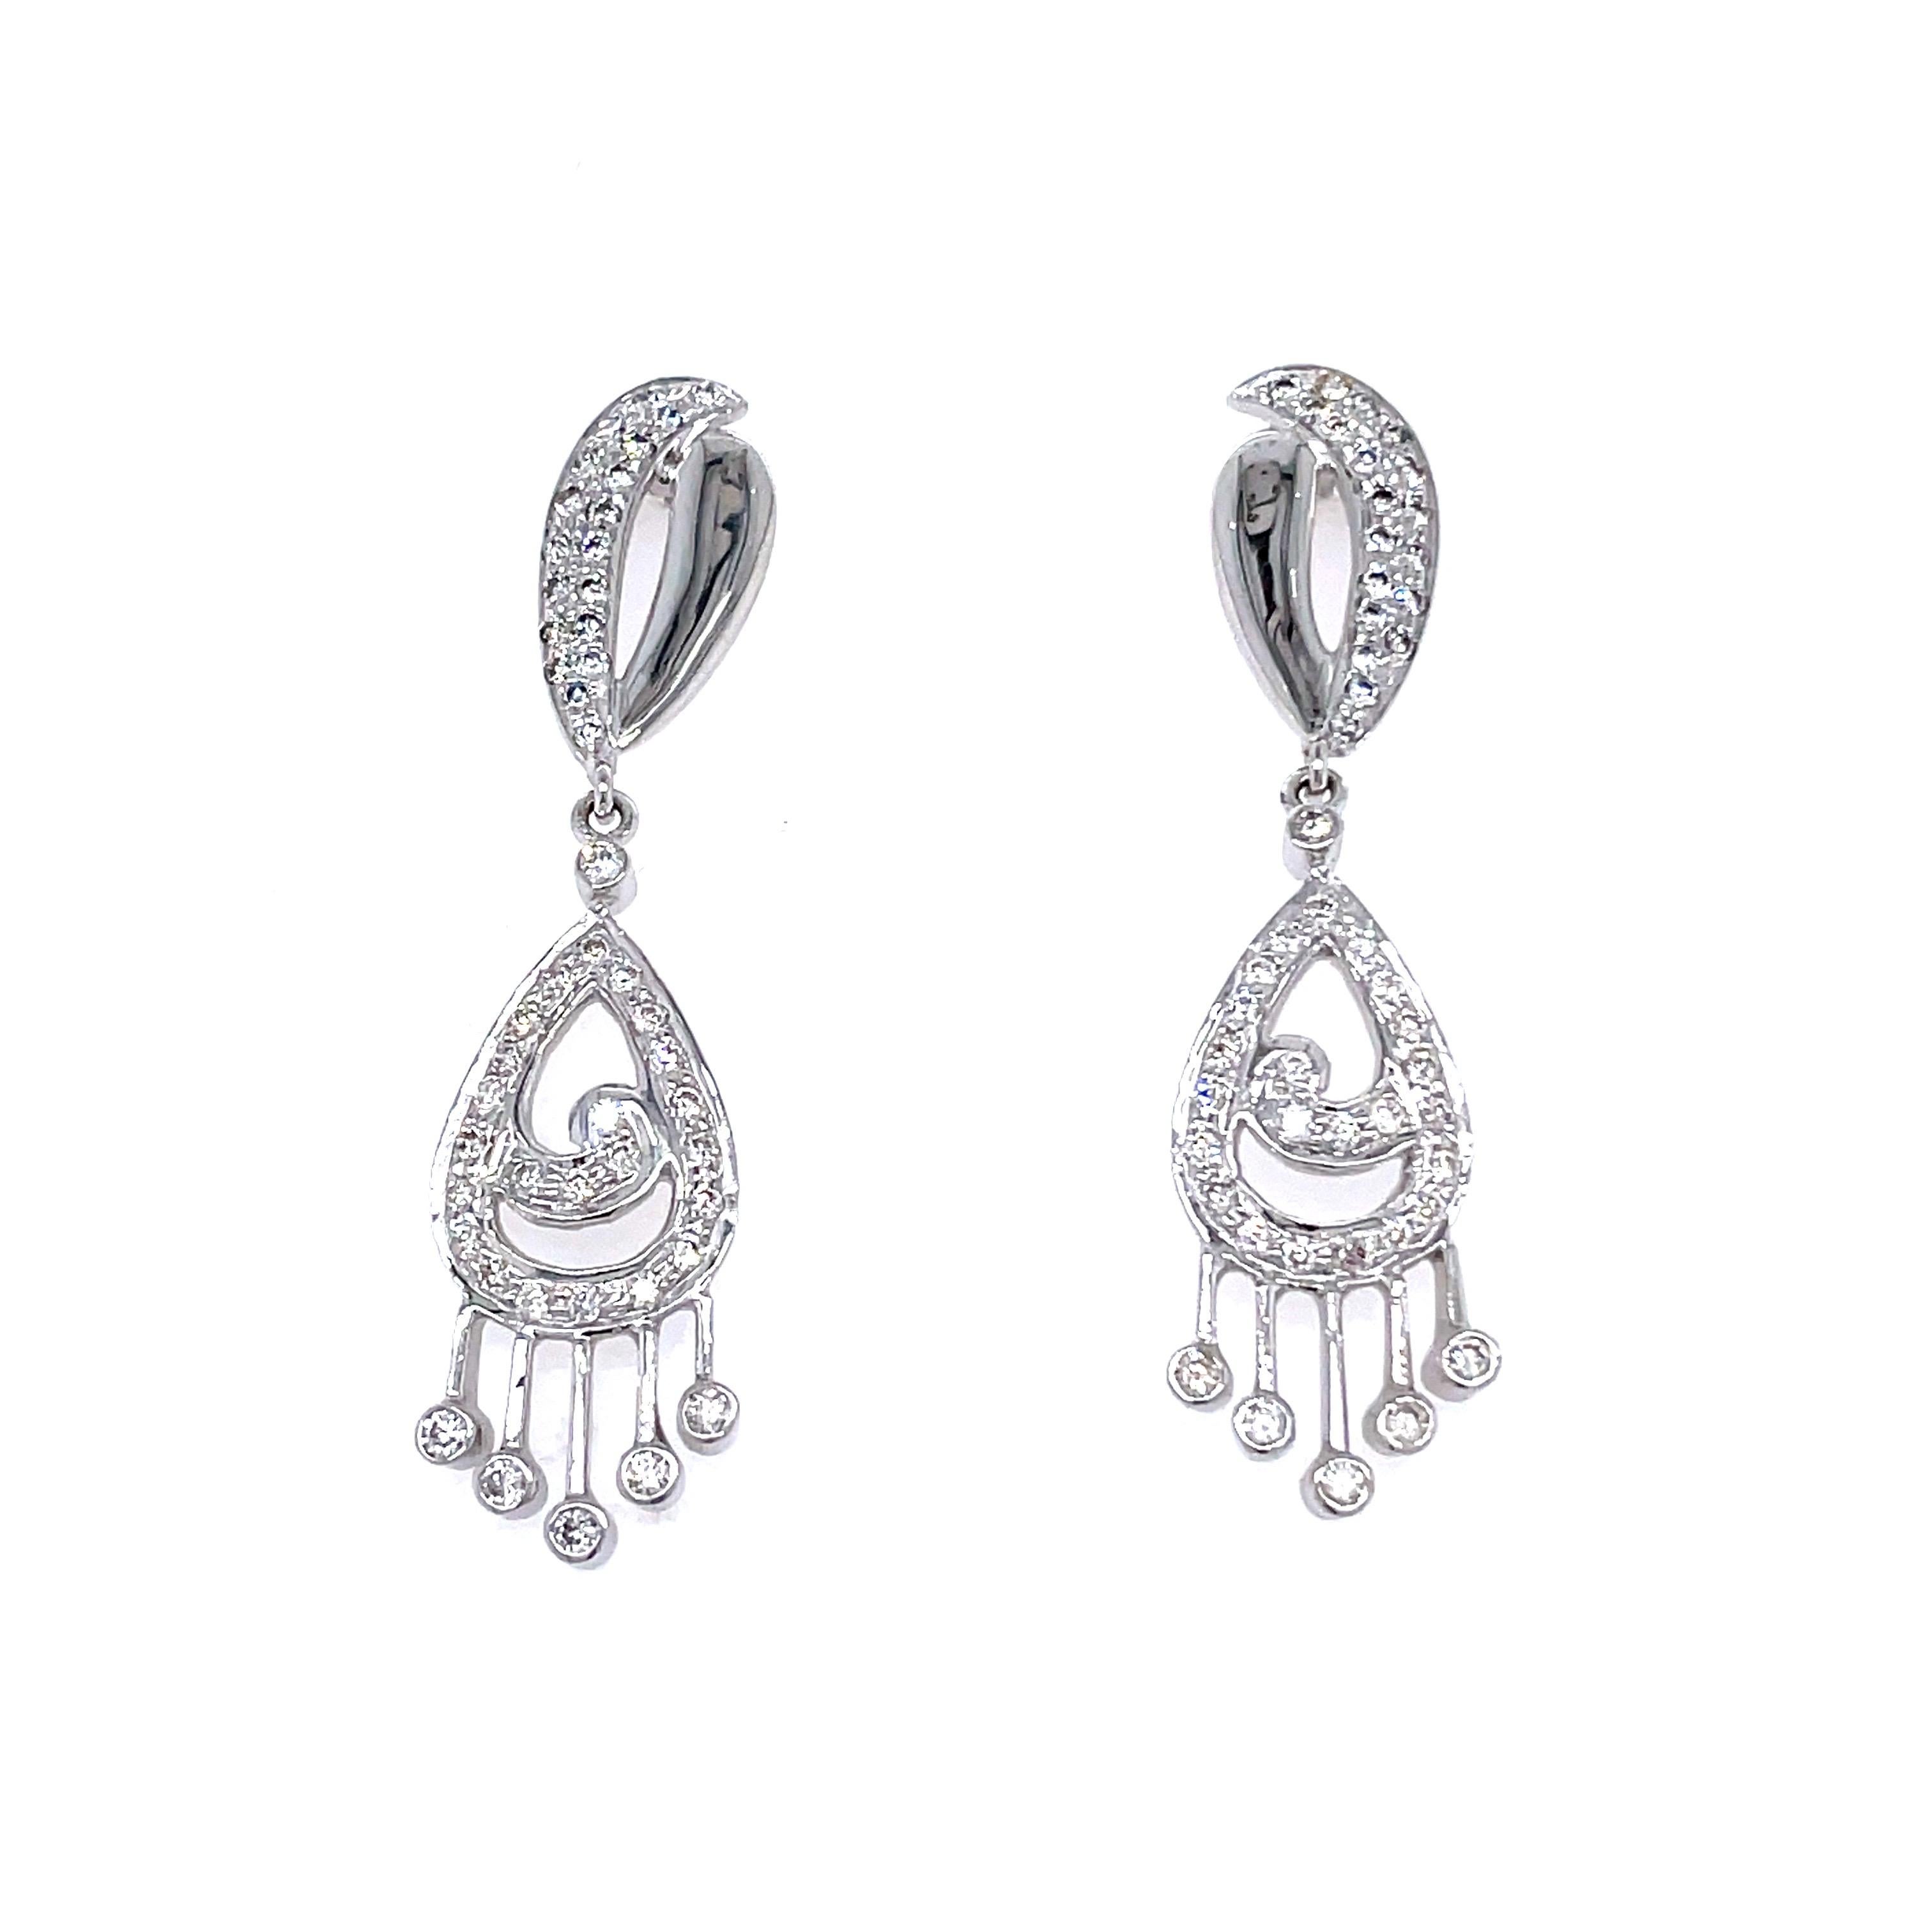 14K White Gold Diamond Dangling Earrings 1.09 Cts

This pair of 14K white gold diamond dangling earrings is unquestionably a symphony of sophistication and glitz. 

These chandelier earrings boast an ensemble of round brilliant pavé diamonds,